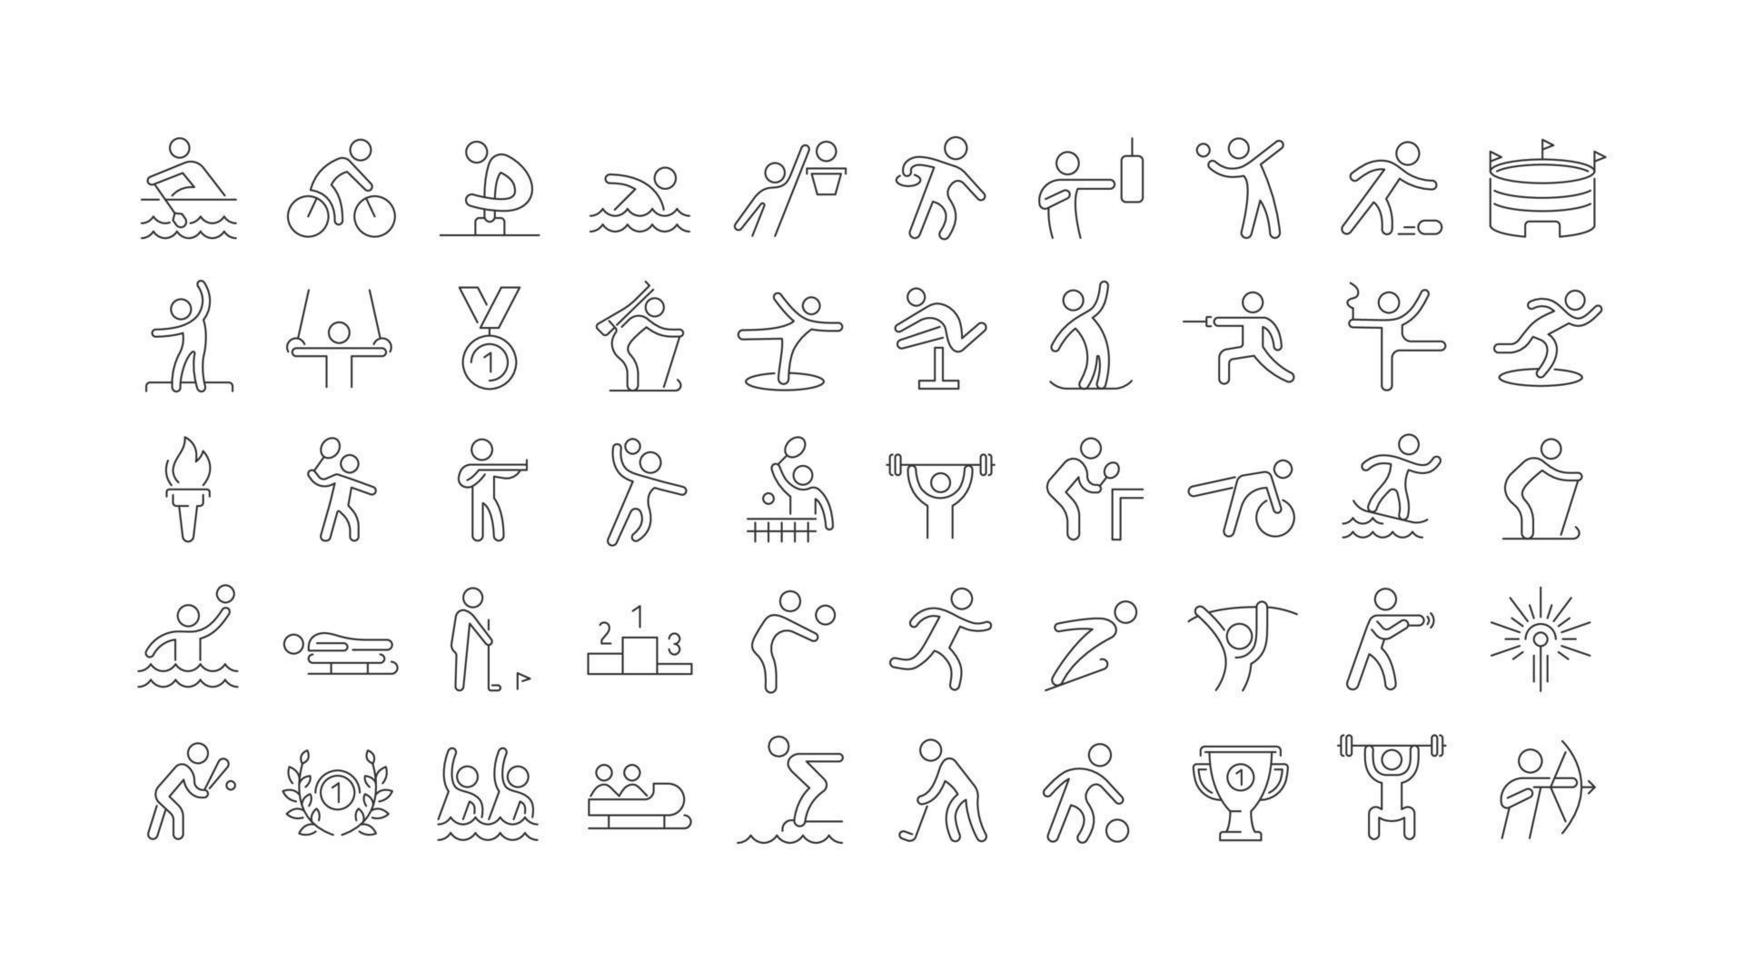 Set of linear icons of International Sporting Events vector